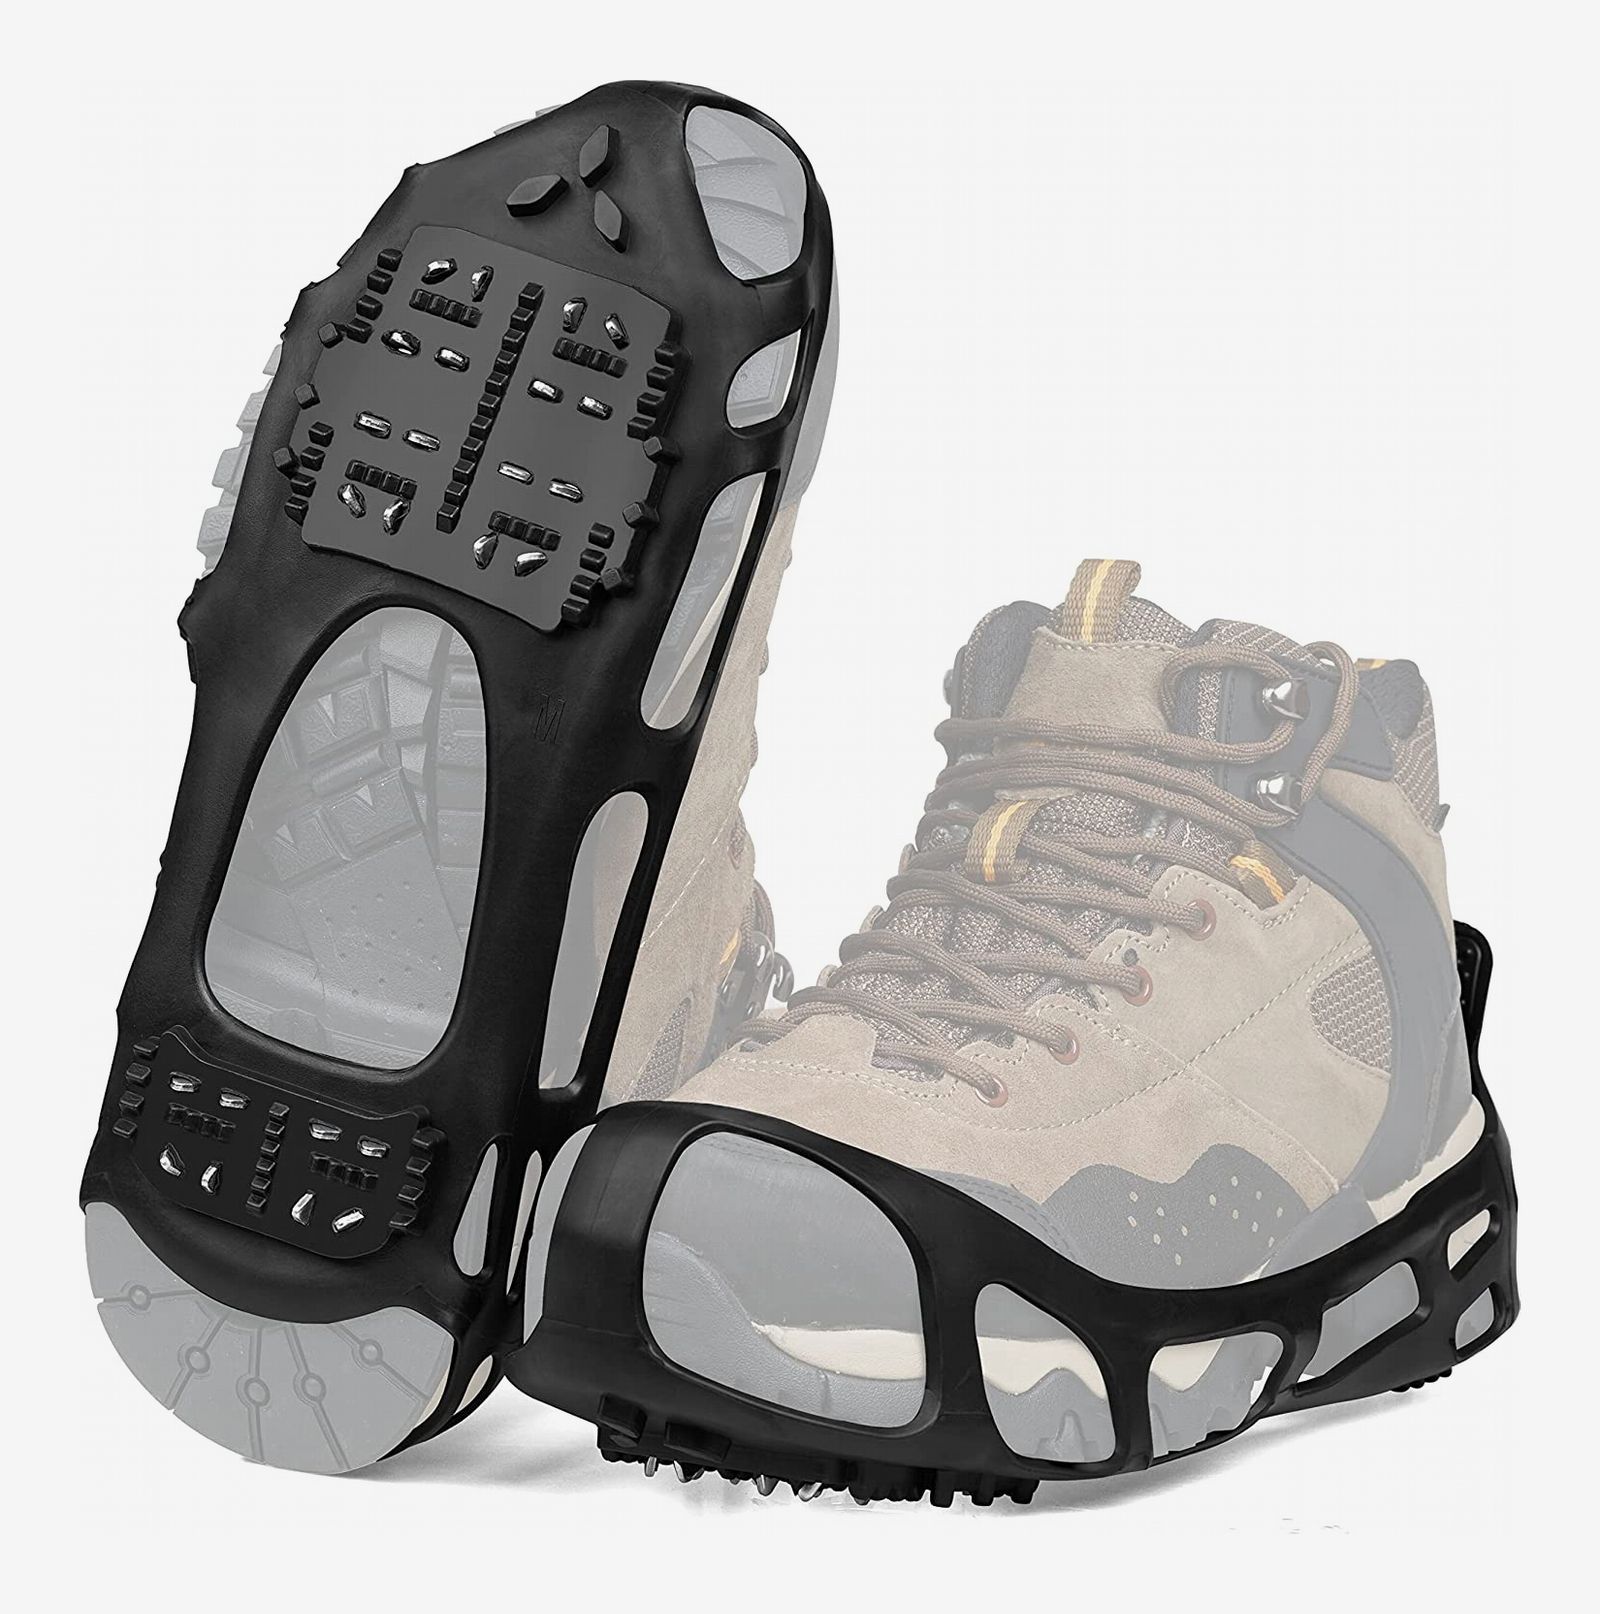 Rover Adventure Gear Crampon Ice Traction Cleat by 